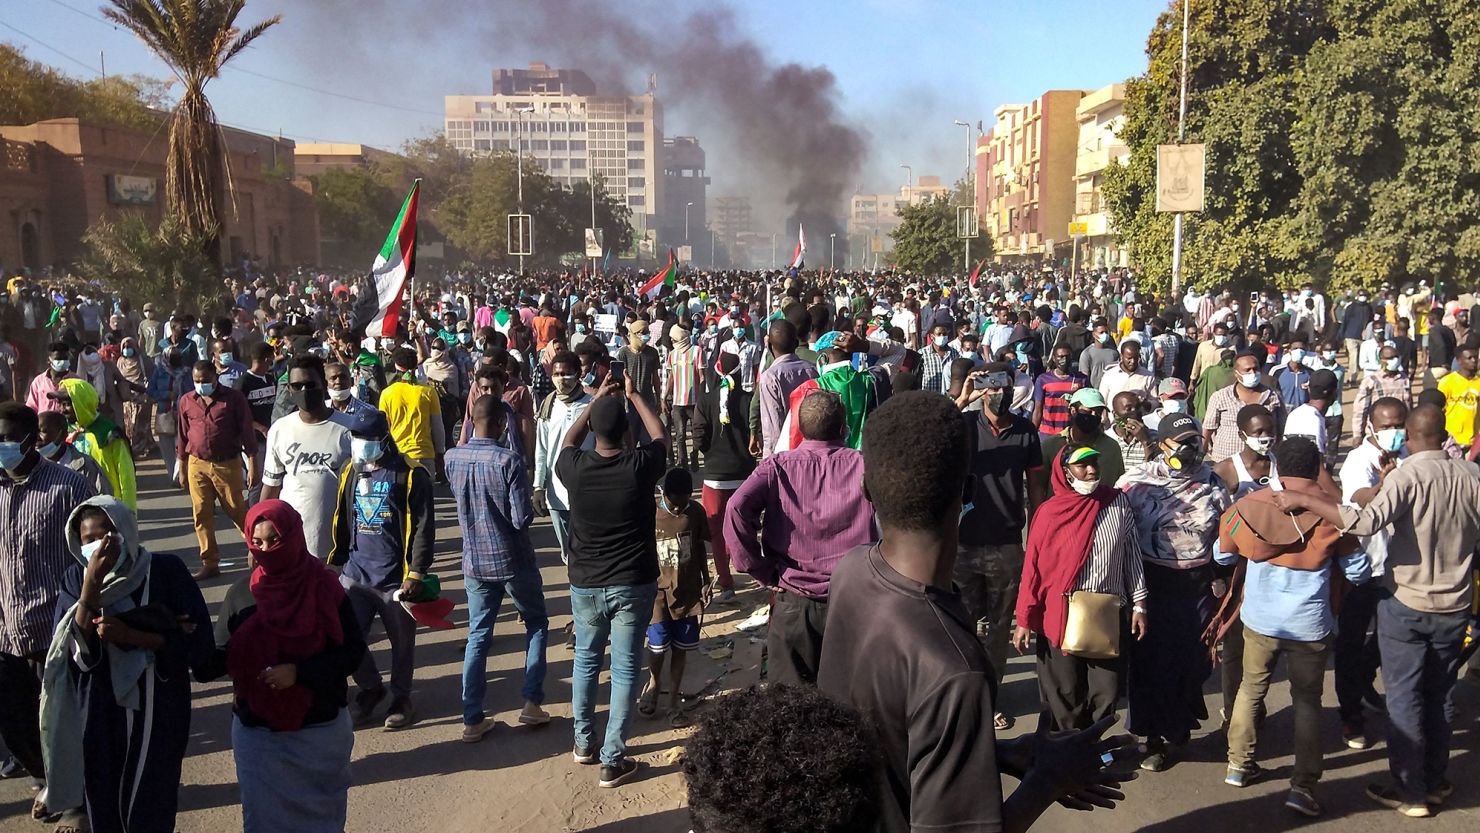 Sudanese protesters demonstrating against the military coup gather near the presidential palace in Khartoum on Thursday.